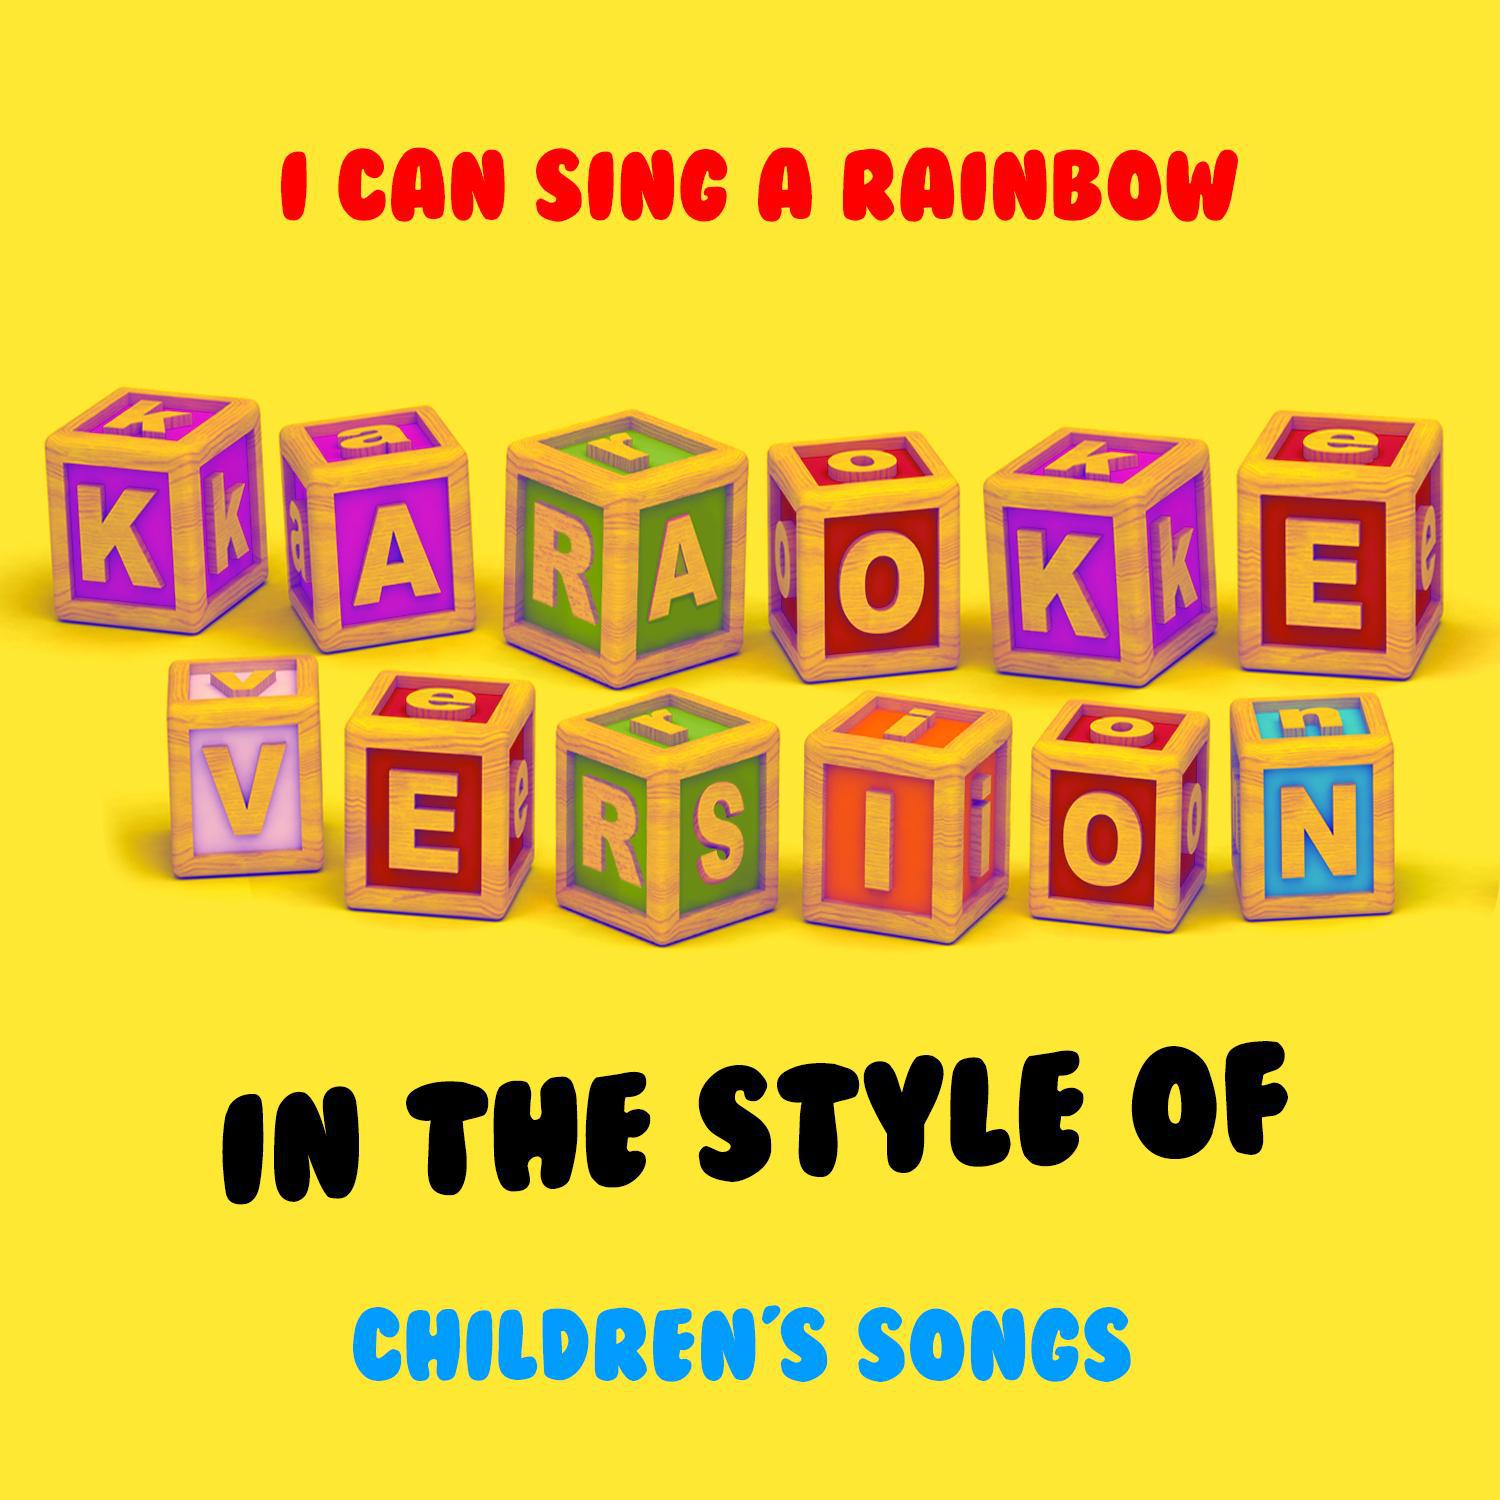 I Can Sing a Rainbow (In the Style of Childrens Songs) [Karaoke Version] - Single